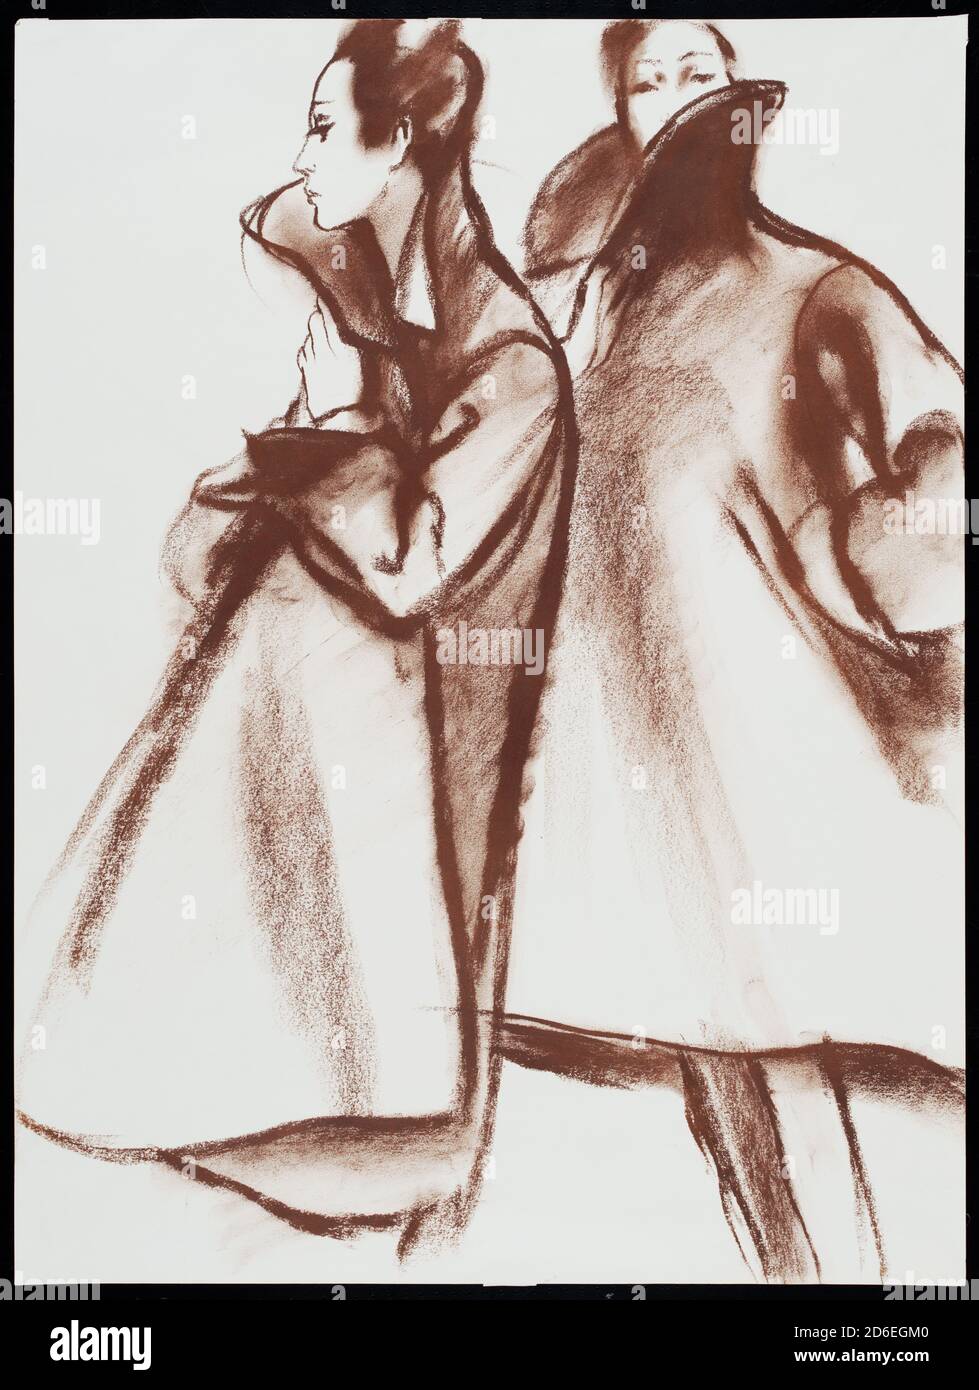 Costume design drawing of knee length coat with welt pocket and trumpet-like collar. Fashion design by Charles James. Illustration by Antonio Lopez. Stock Photo